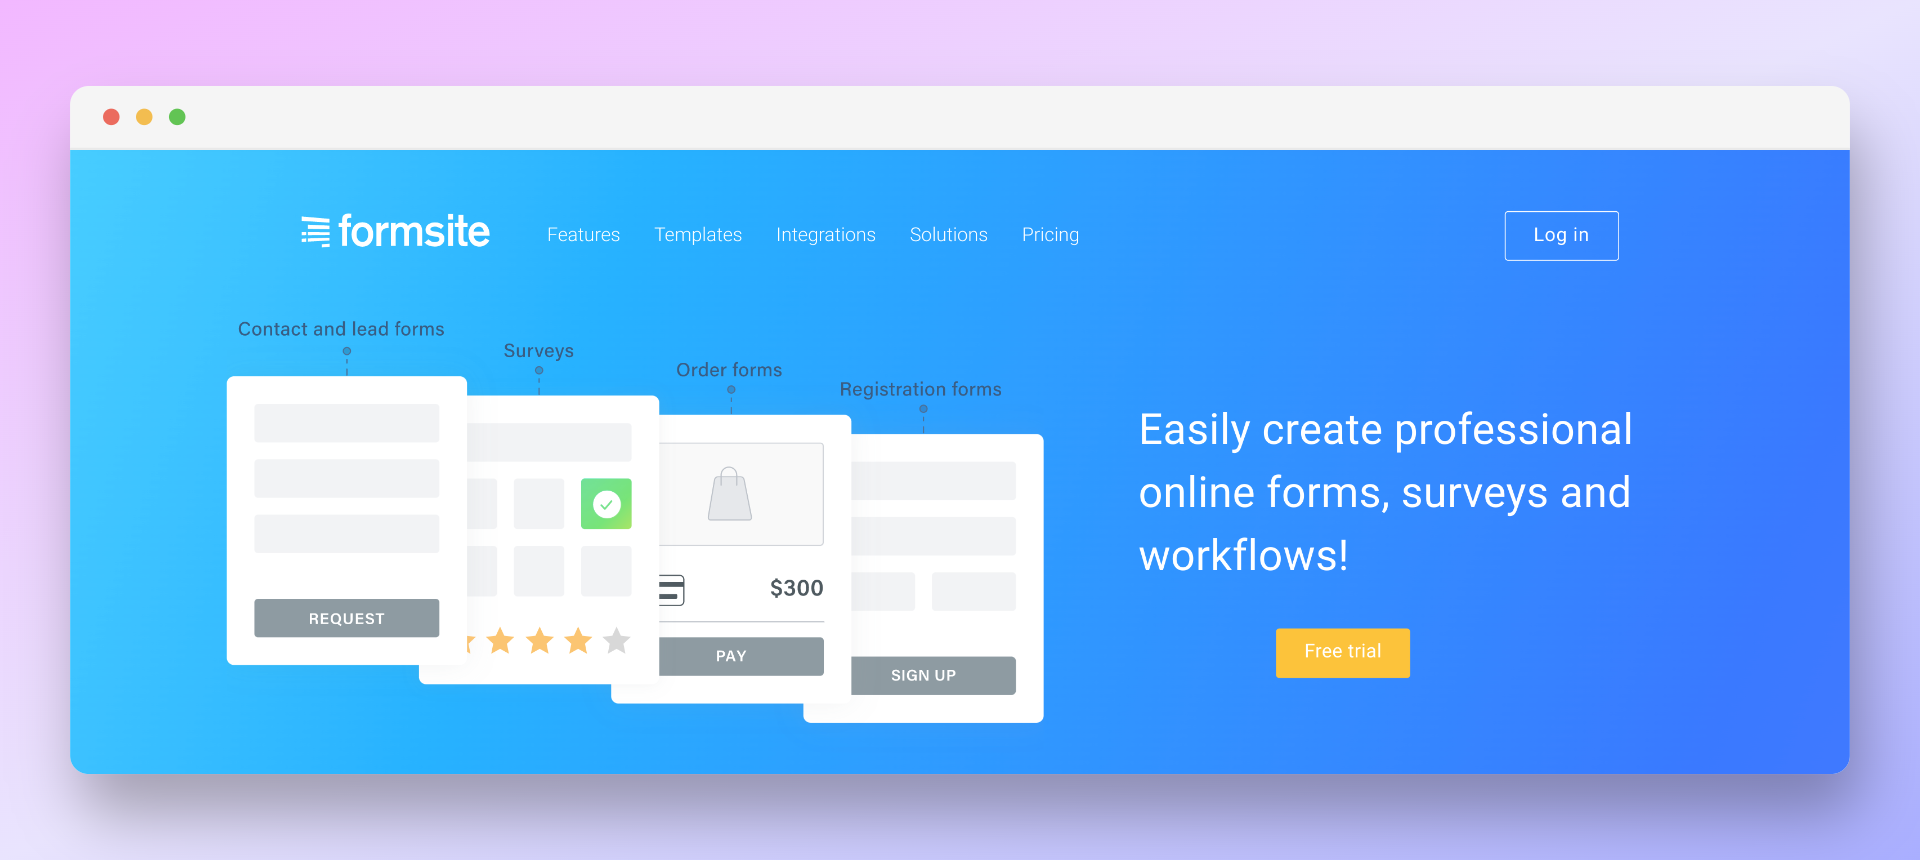 Formsite landing page